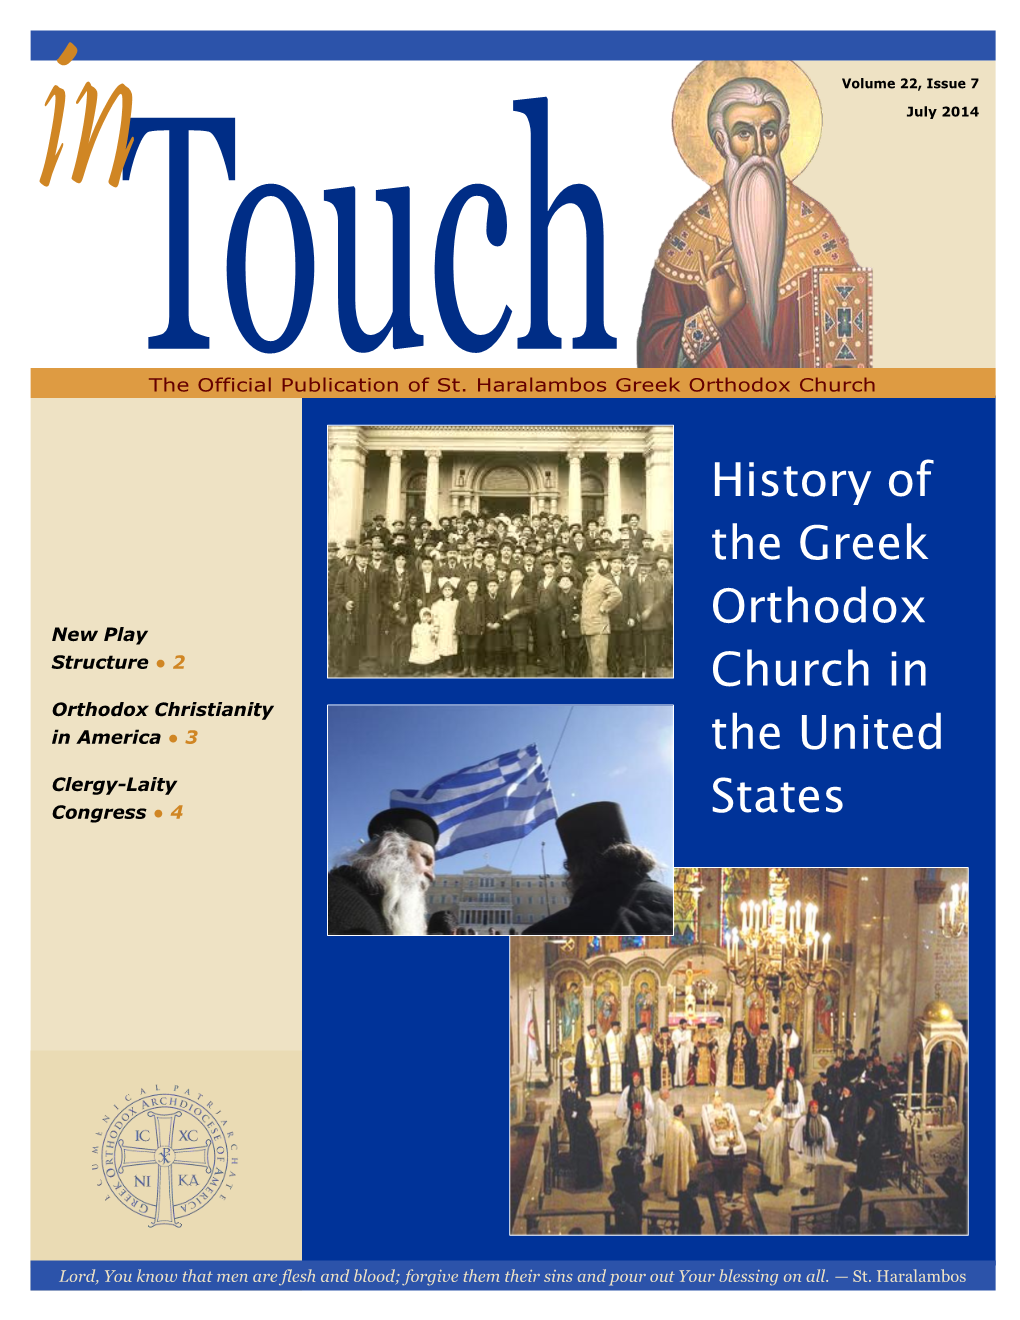 History of the Greek Orthodox Church in the United States